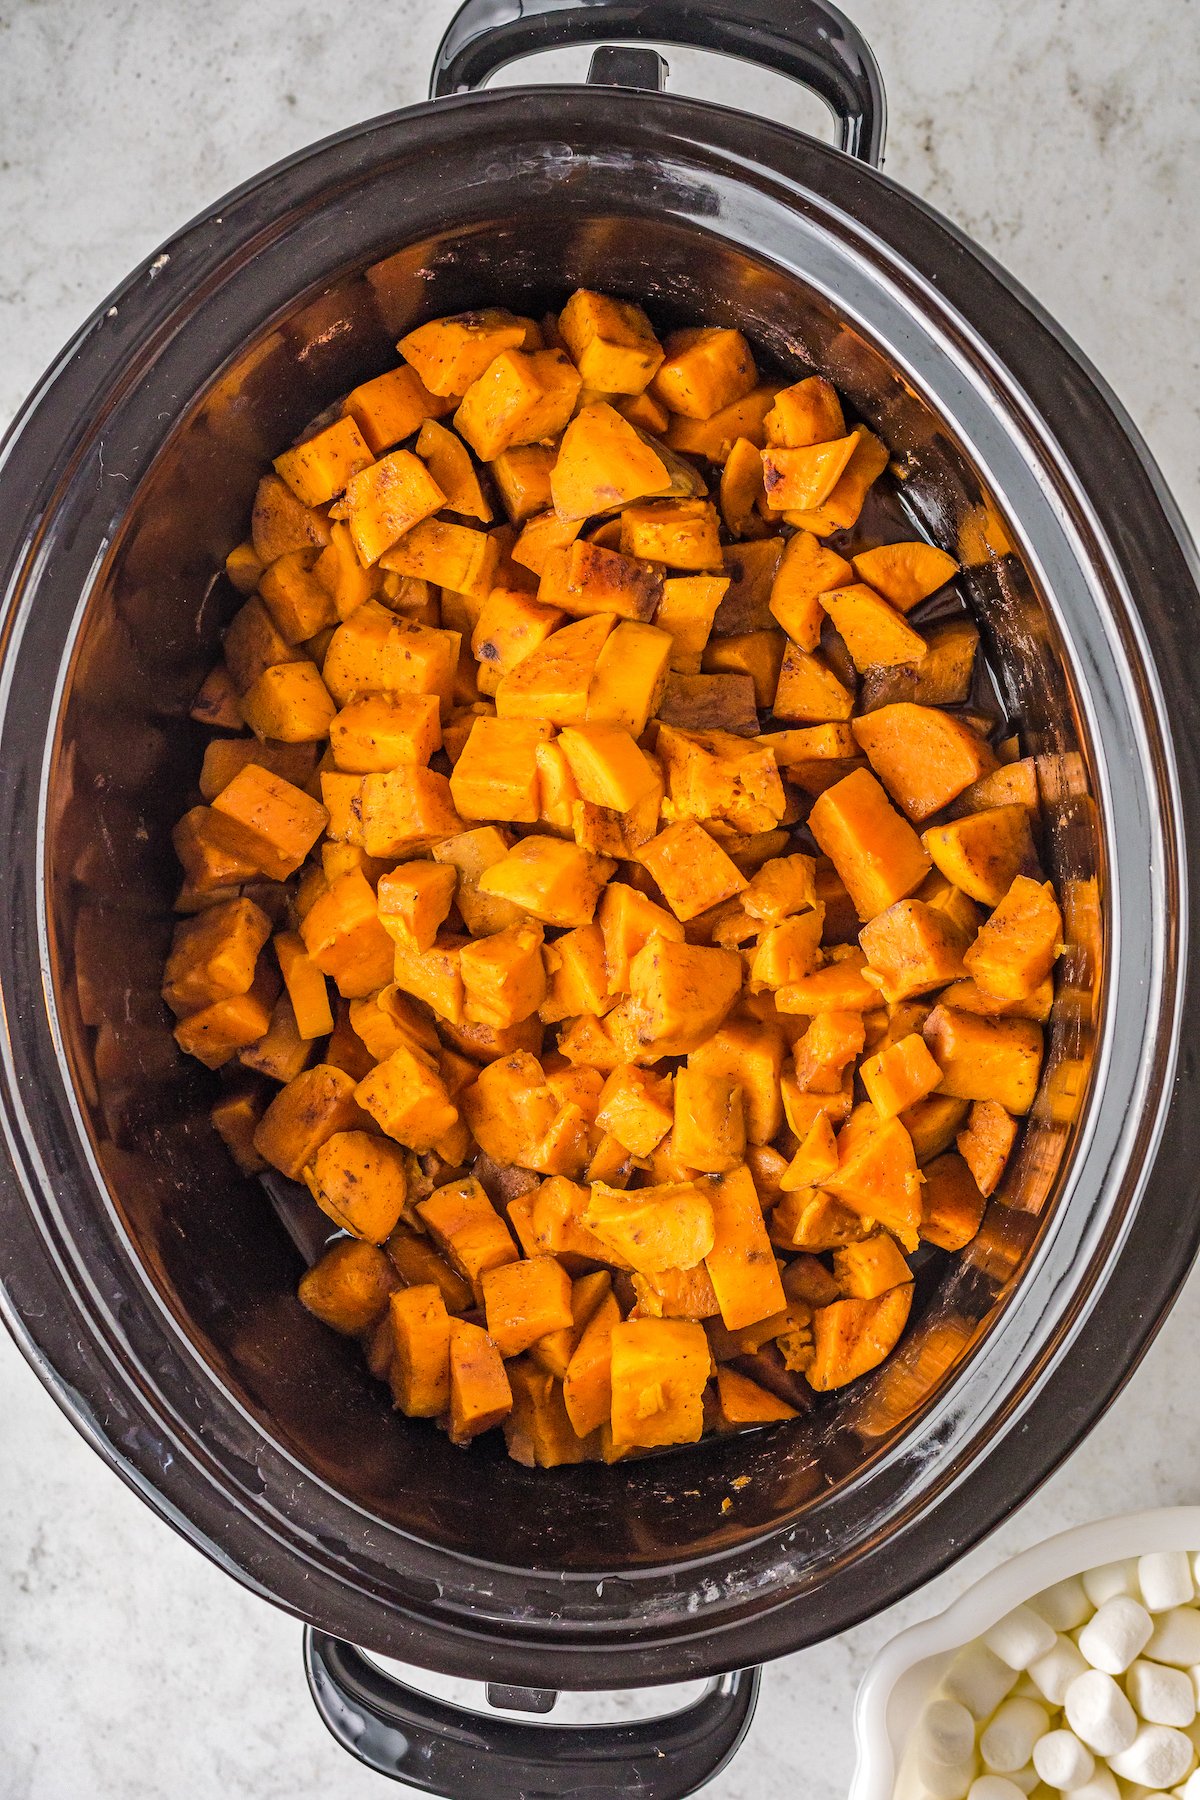 Cooked sweet potatoes in a crockpot.